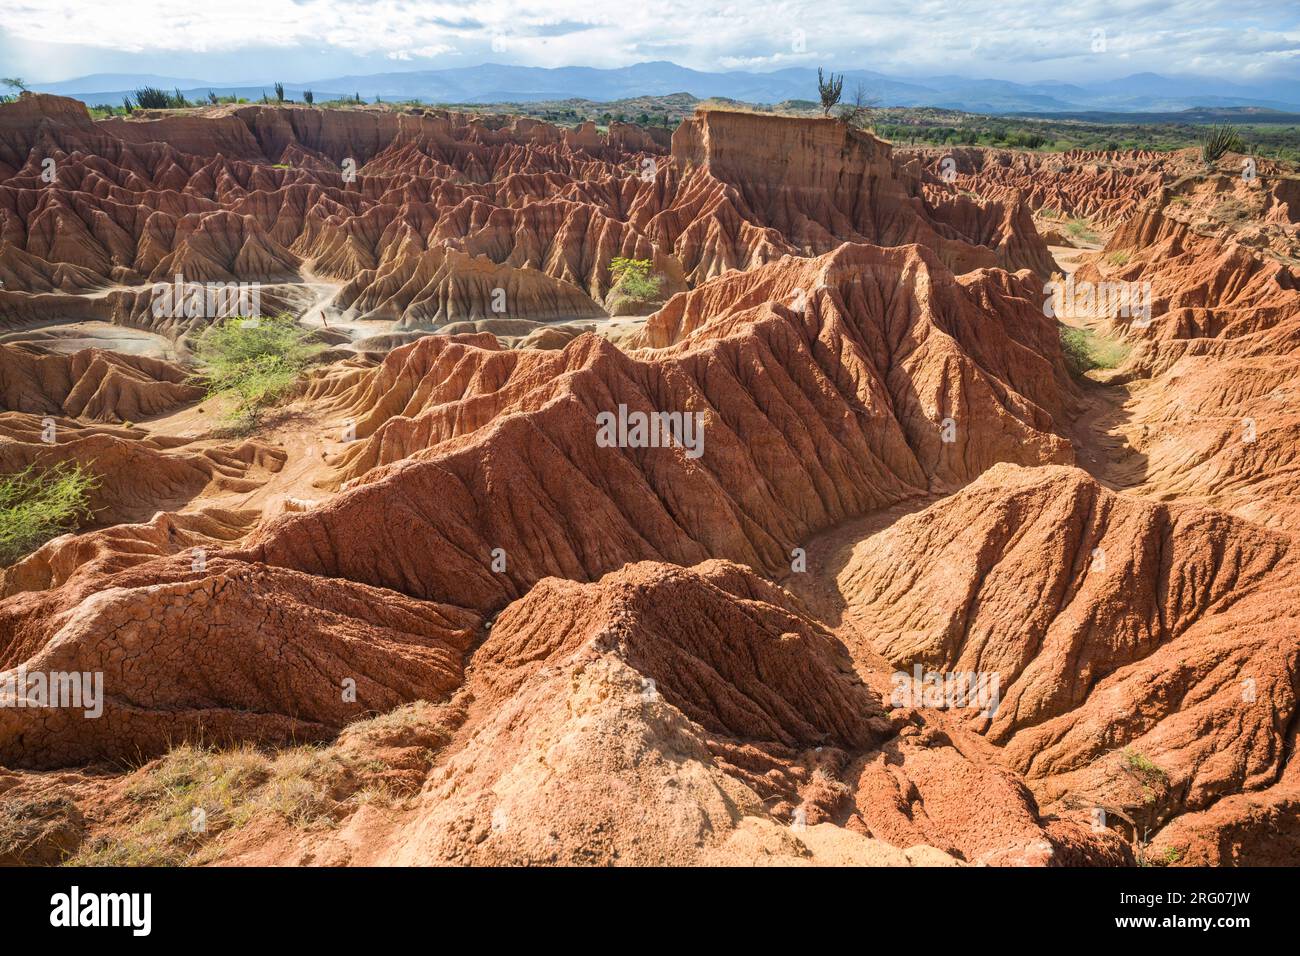 Unusual landscapes in Tatacoa desert, Colombia, South America Stock Photo